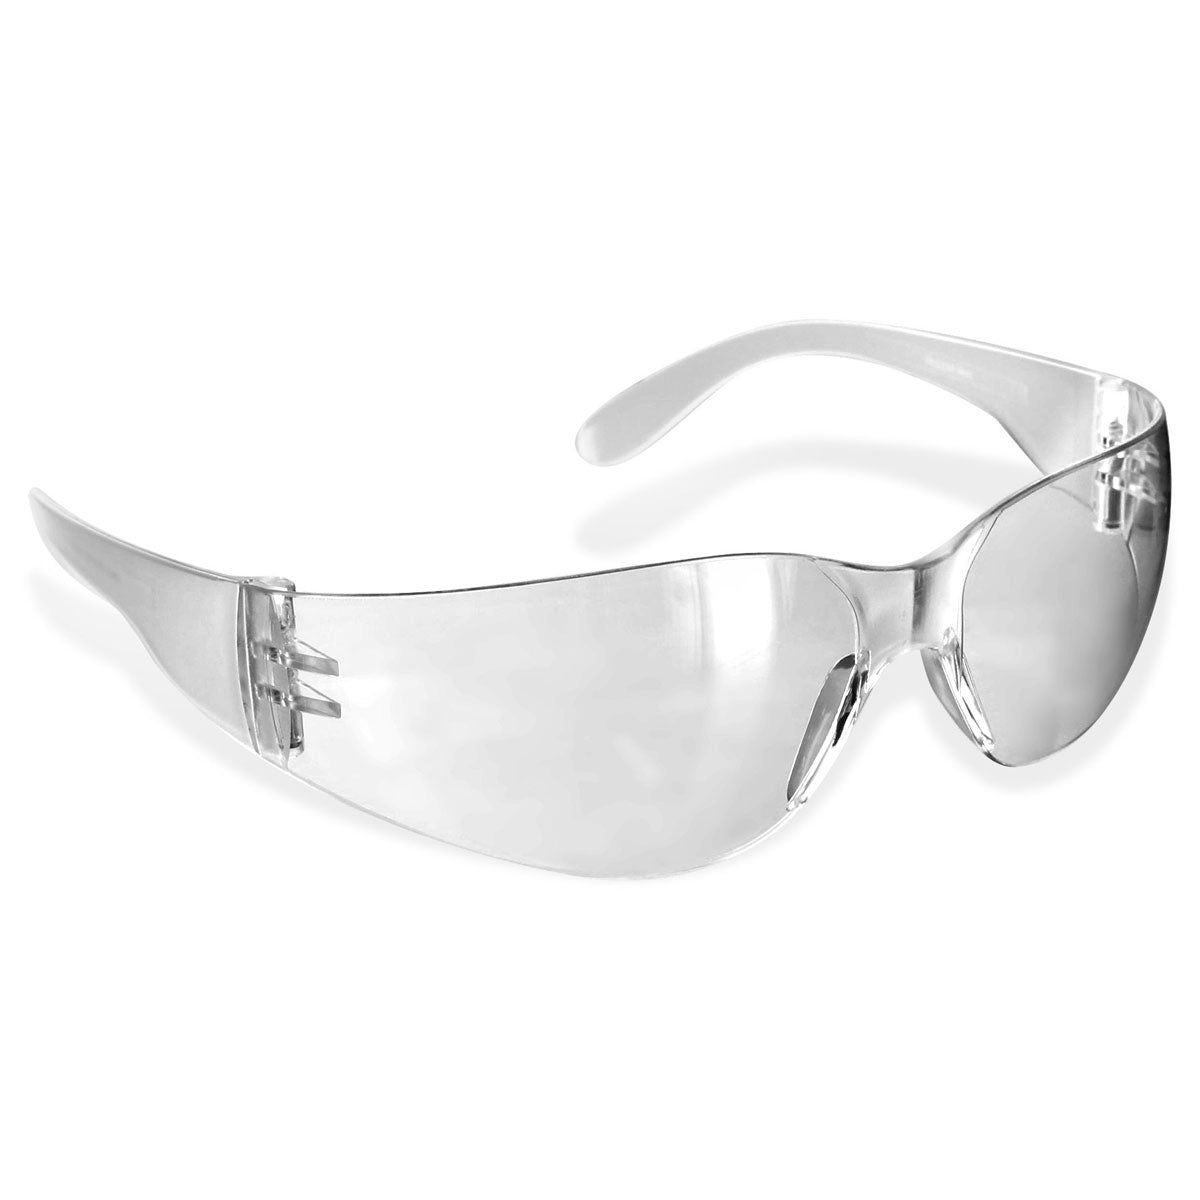 Rugged Blue Small Faces Safety Glasses- Clear - 12 Pair